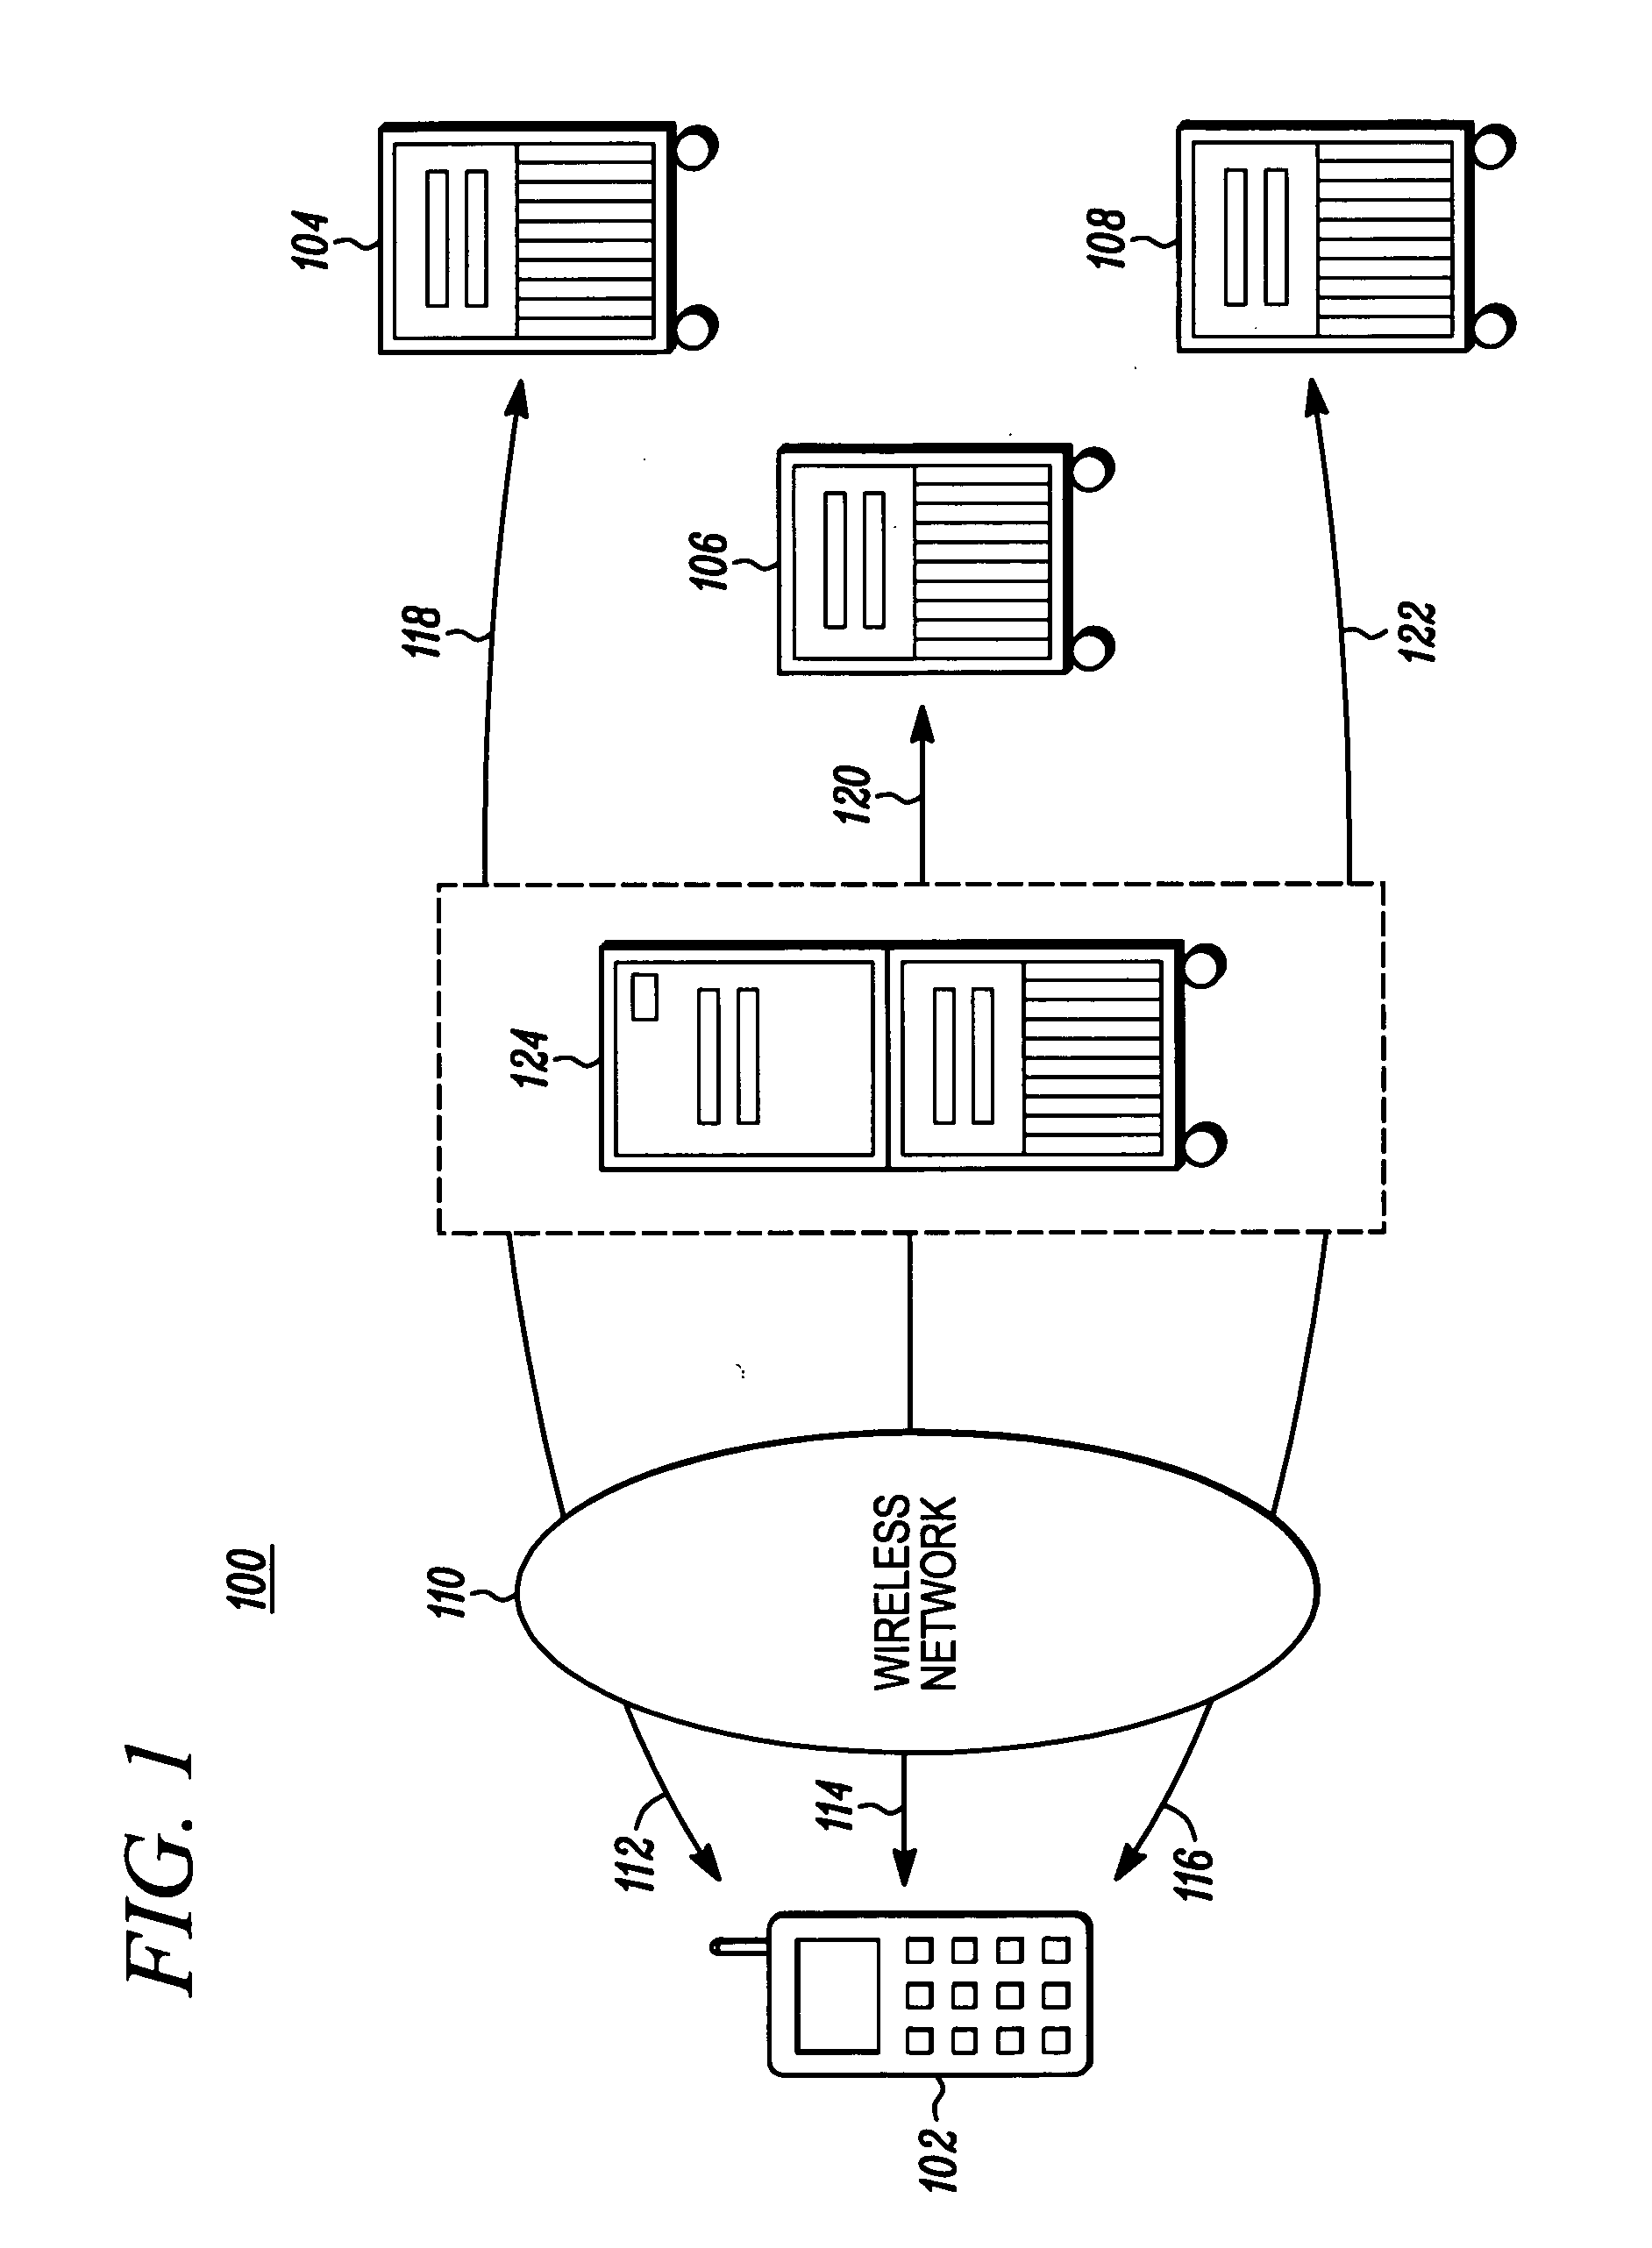 System and method for wireless download capability of media objects from multiple sources